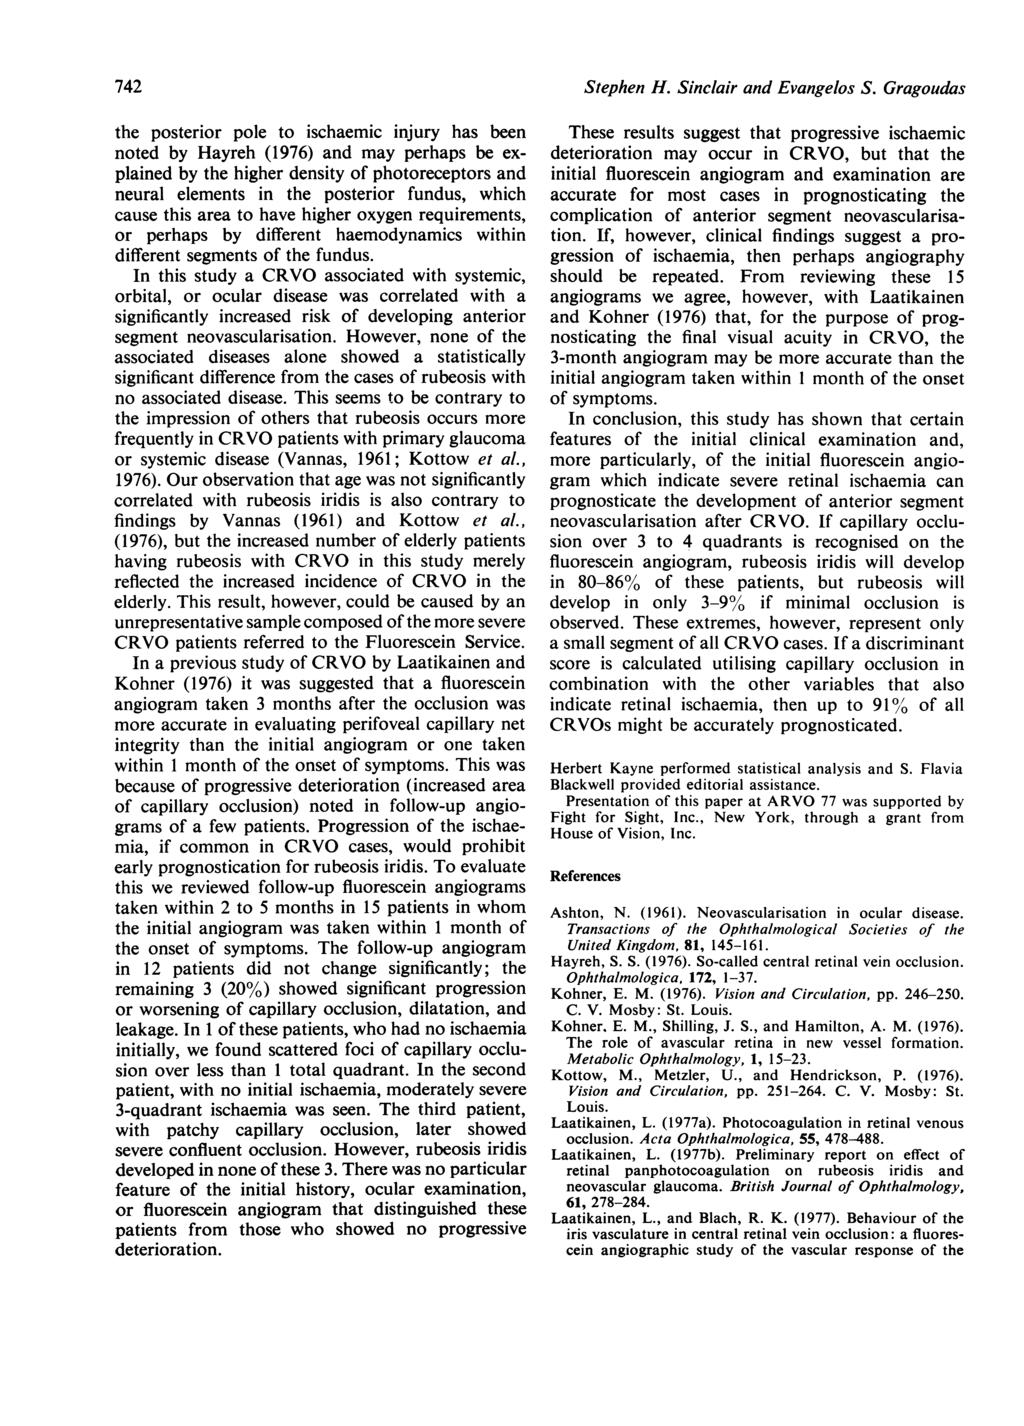 742 the posterior pole to ischaemic injury has been noted by Hayreh (1976) and may perhaps be explained by the higher density of photoreceptors and neural elements in the posterior fundus, which